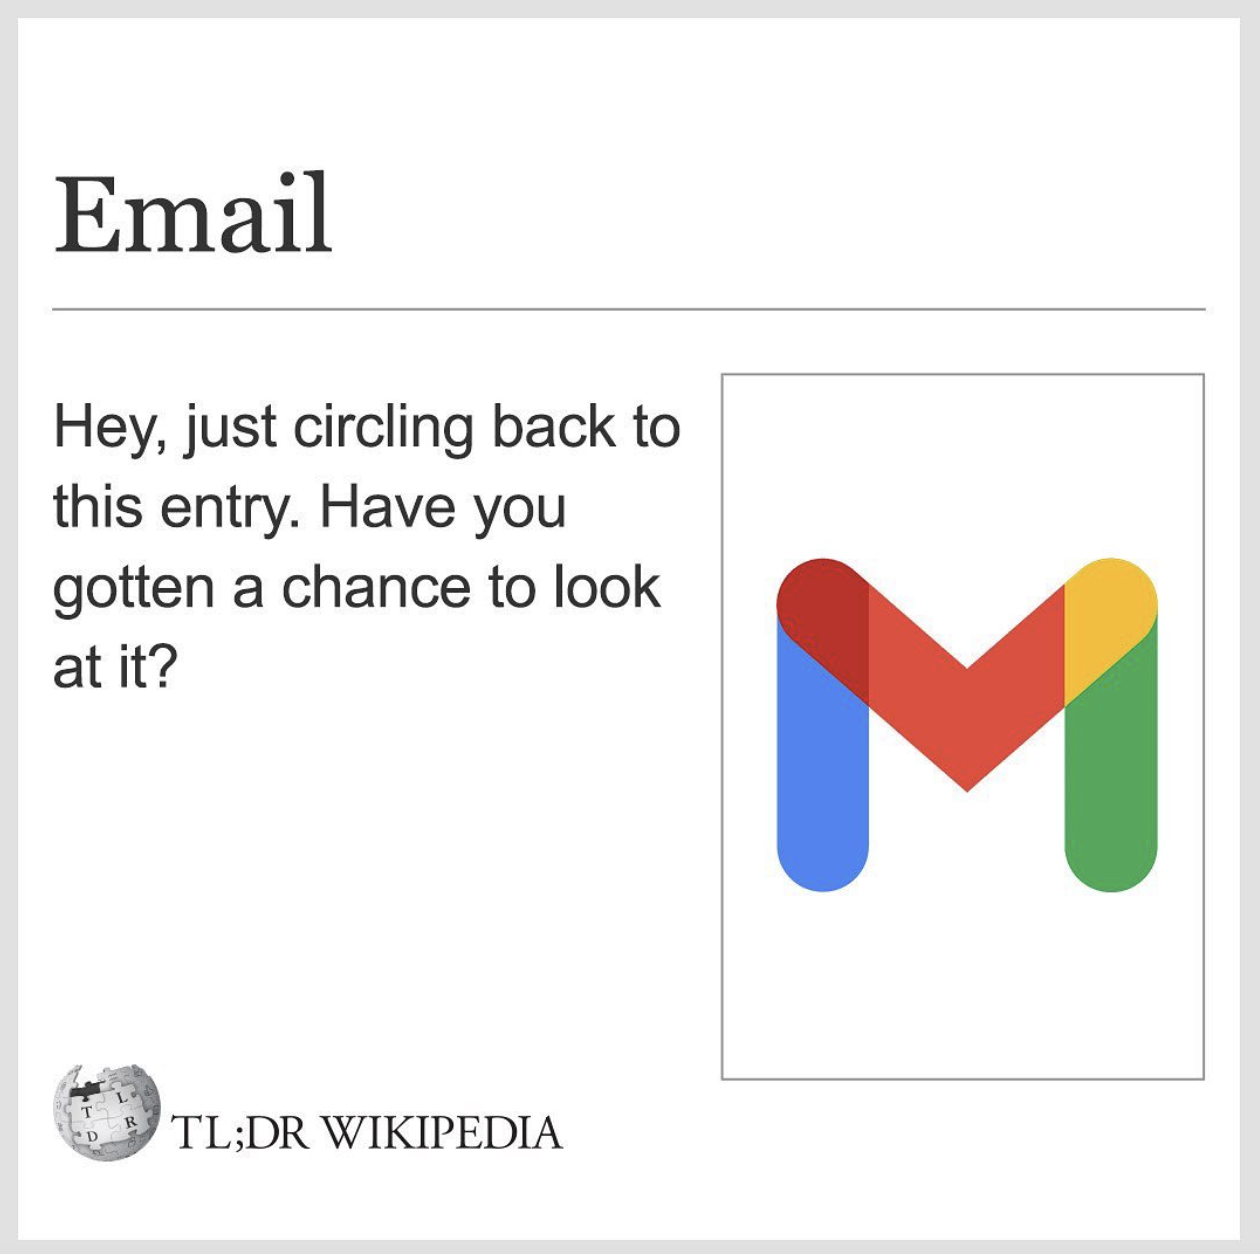 Wikipedia Memes - logo gmail - Email Hey, just circling back to this entry. Have you gotten a chance to look at it? M Tl;Dr Wikipedia